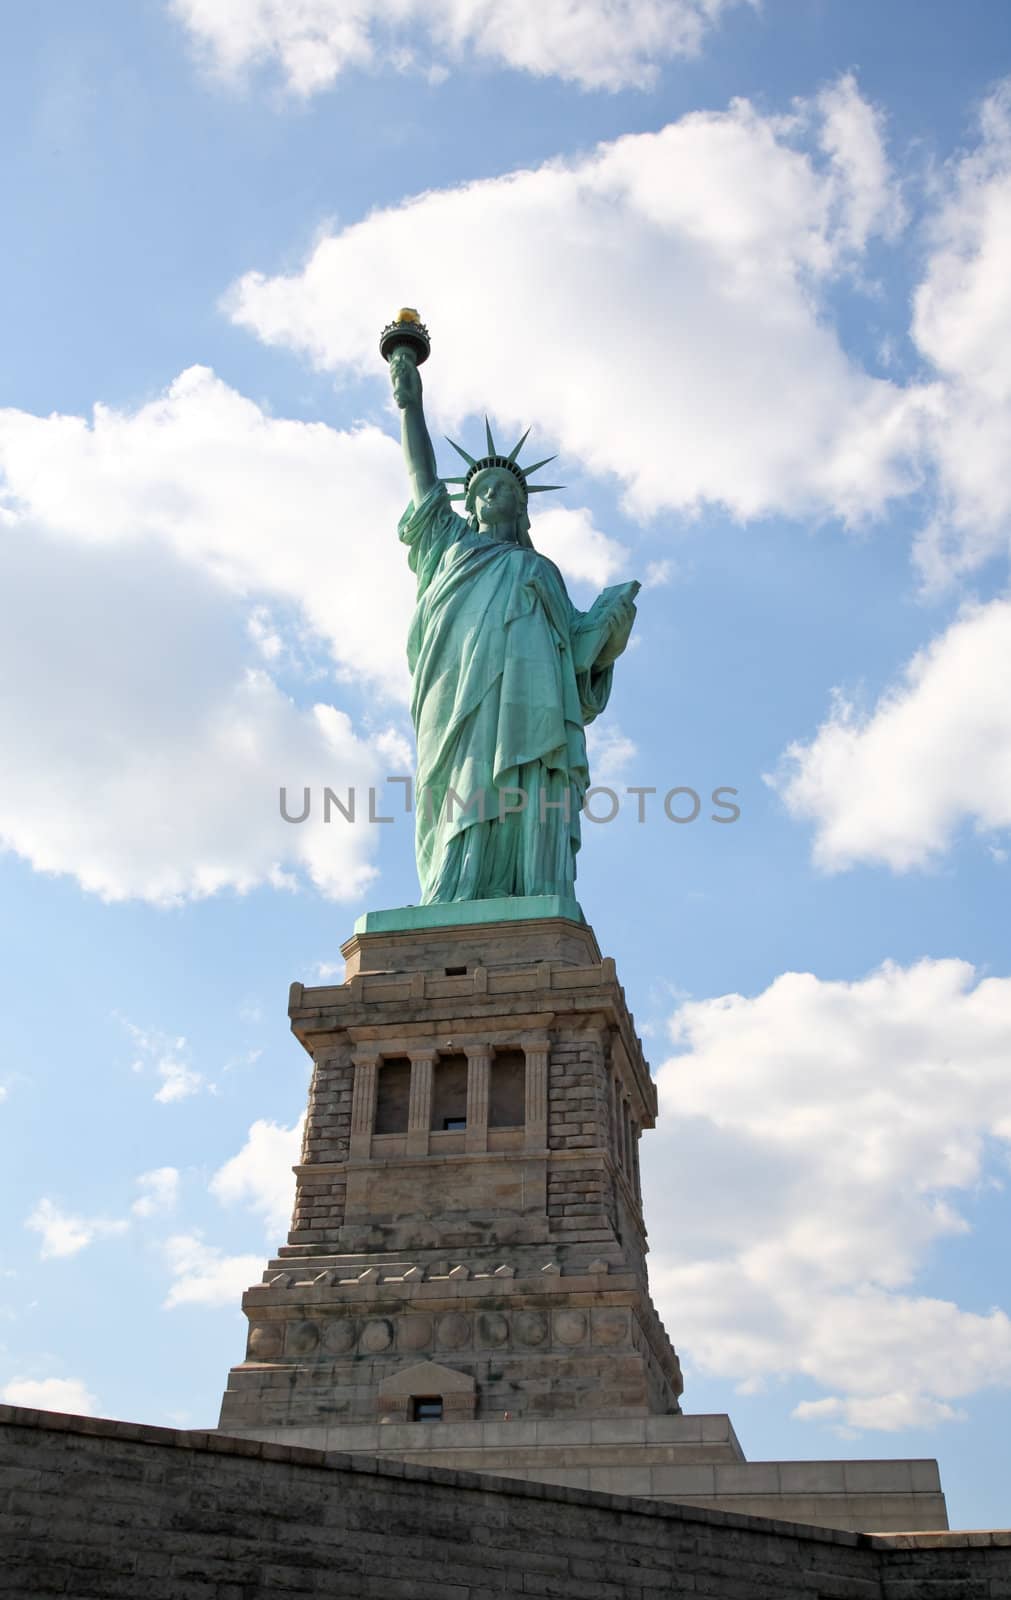 The Statue of Liberty in New York Harbor